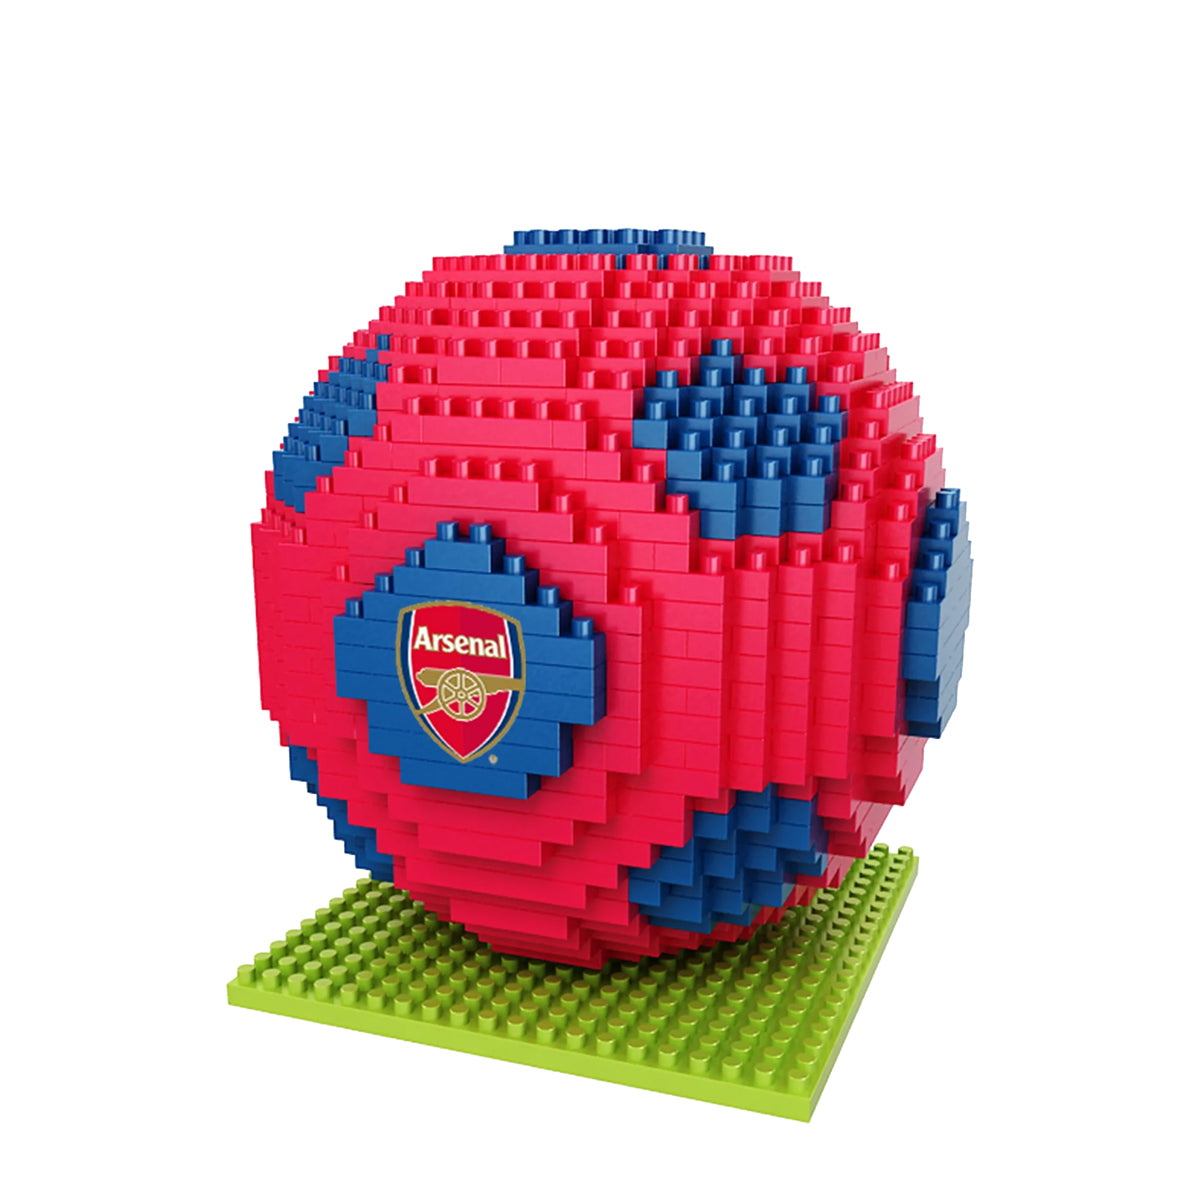 Arsenal But It's Built From LEGO?